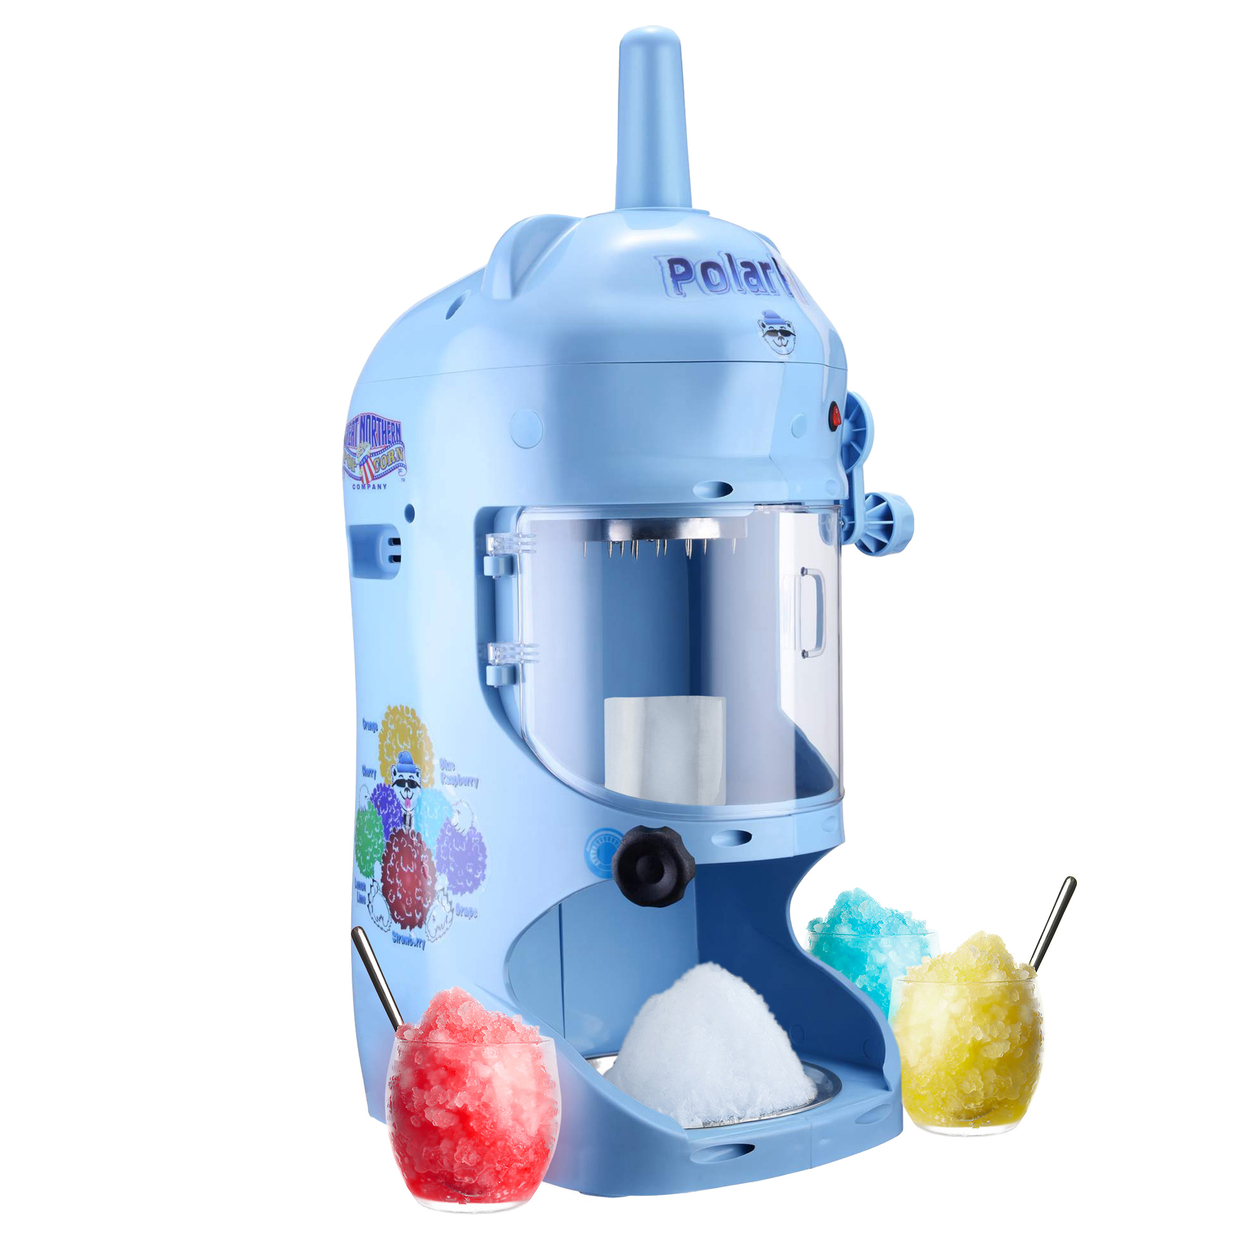 Snow Cone Machine Ice Shaver 250W Motor Countertop Crushed Ice Maker, Blue